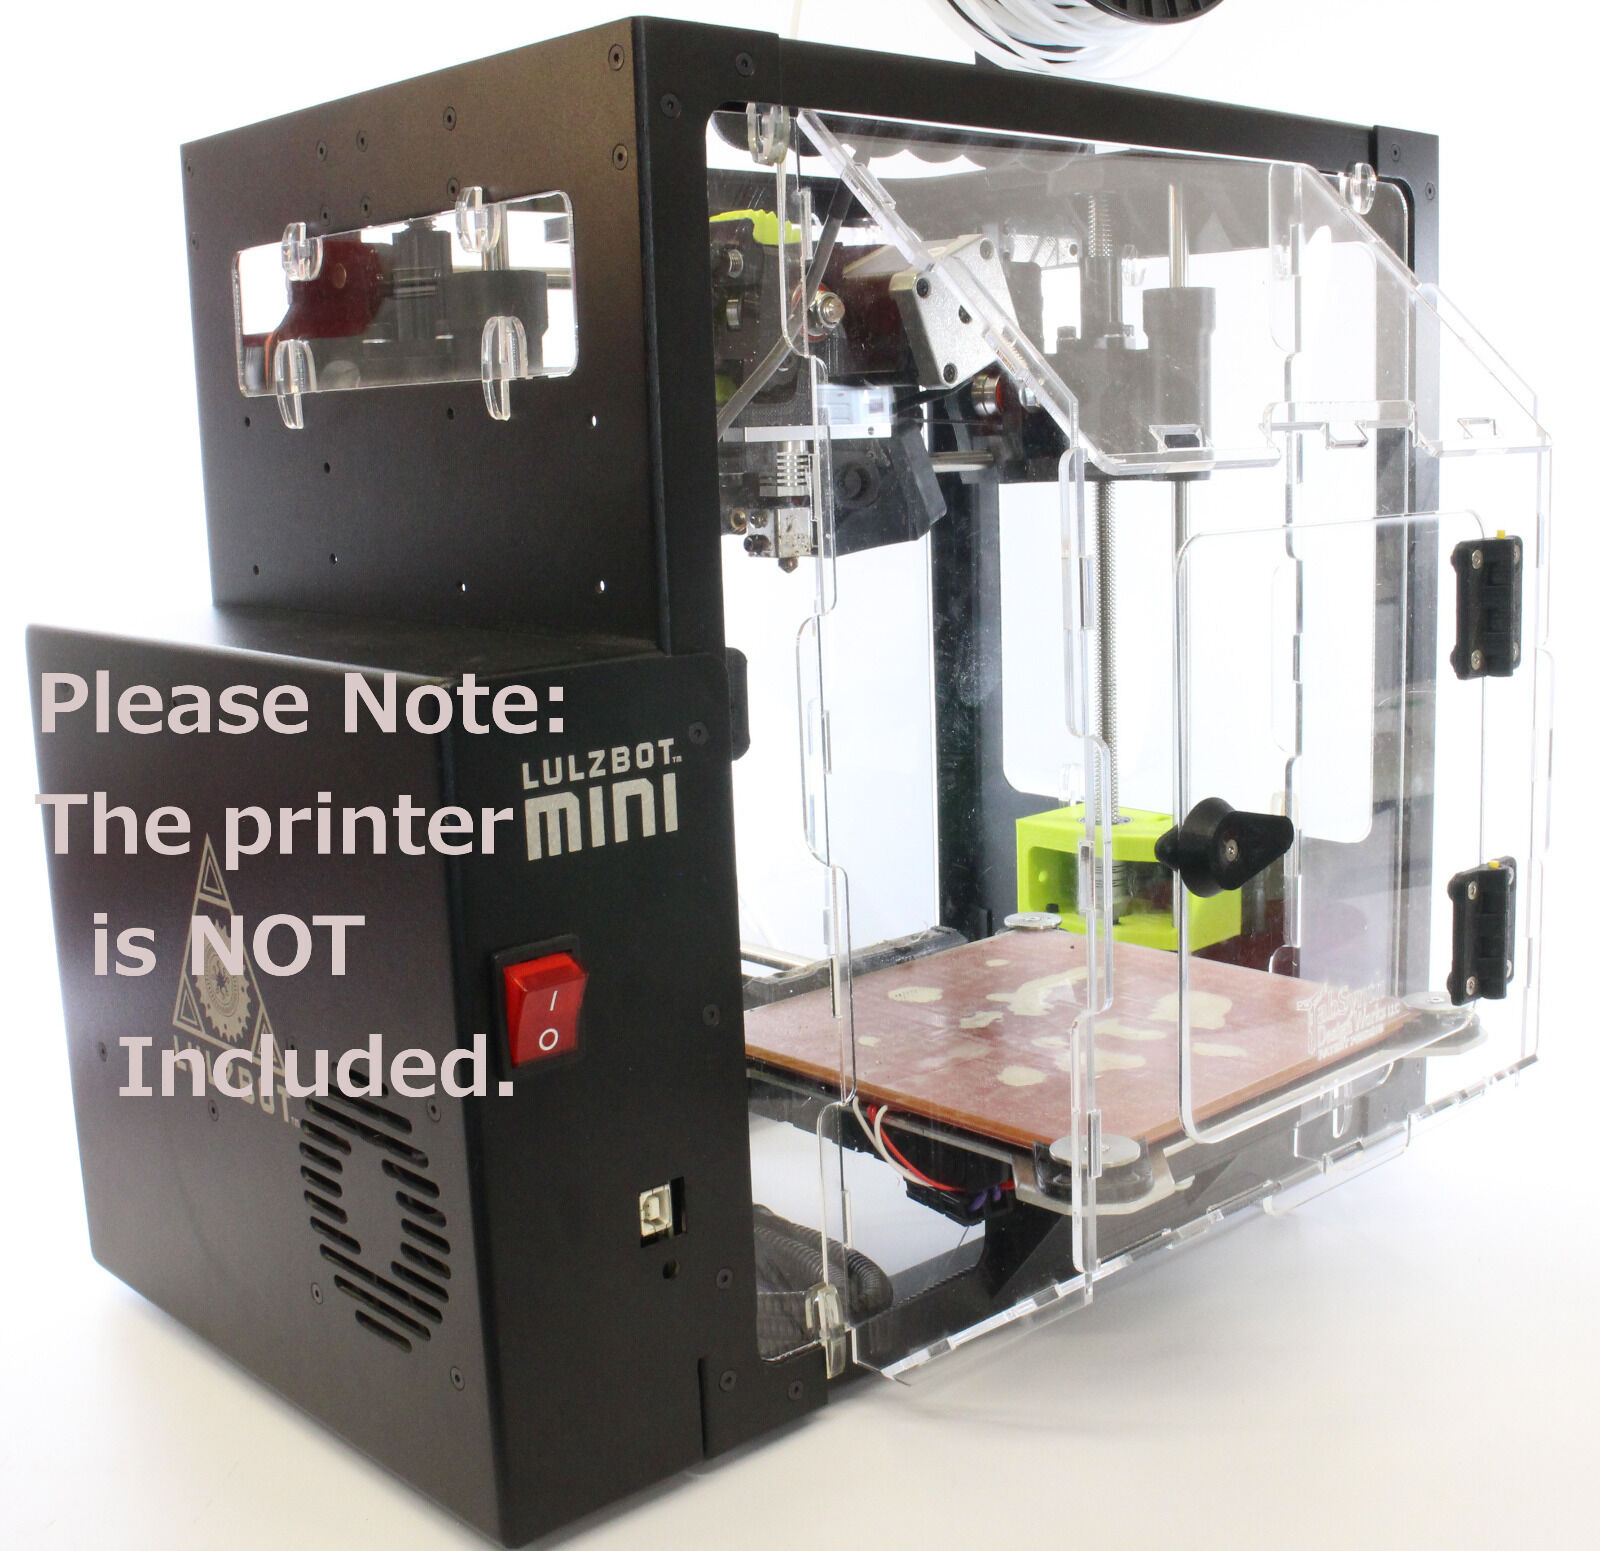 Add-on Polycarbonate Enclosure for Lulzbot Mini 3D Printer with Lexan Top Plate